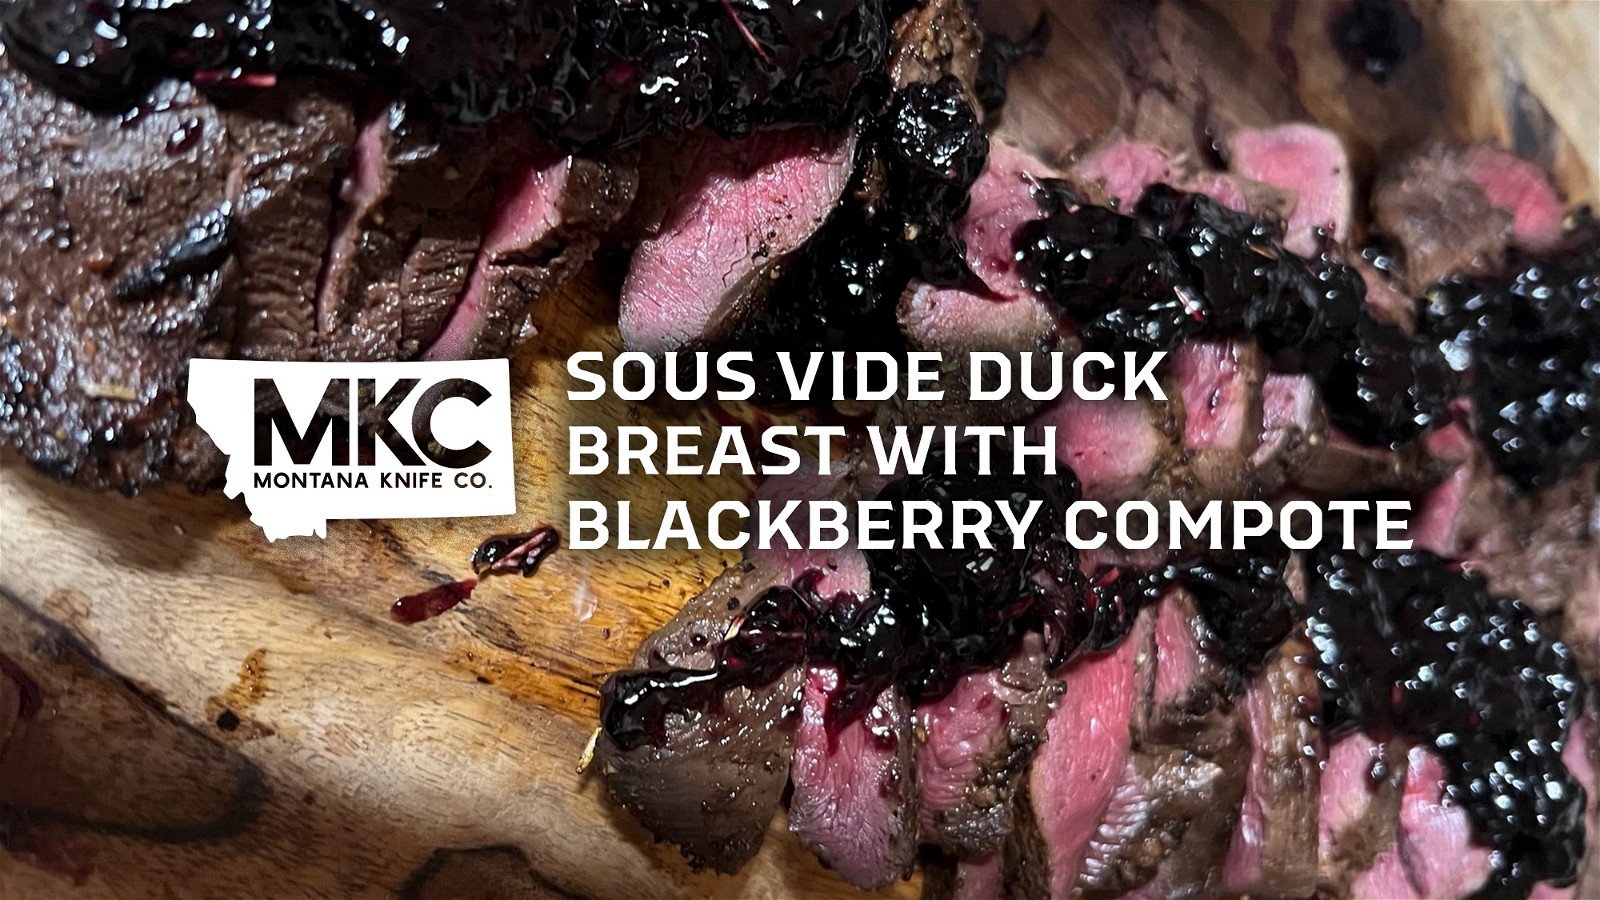 Image of Sous Vide Duck Breast With Blackberry Compote